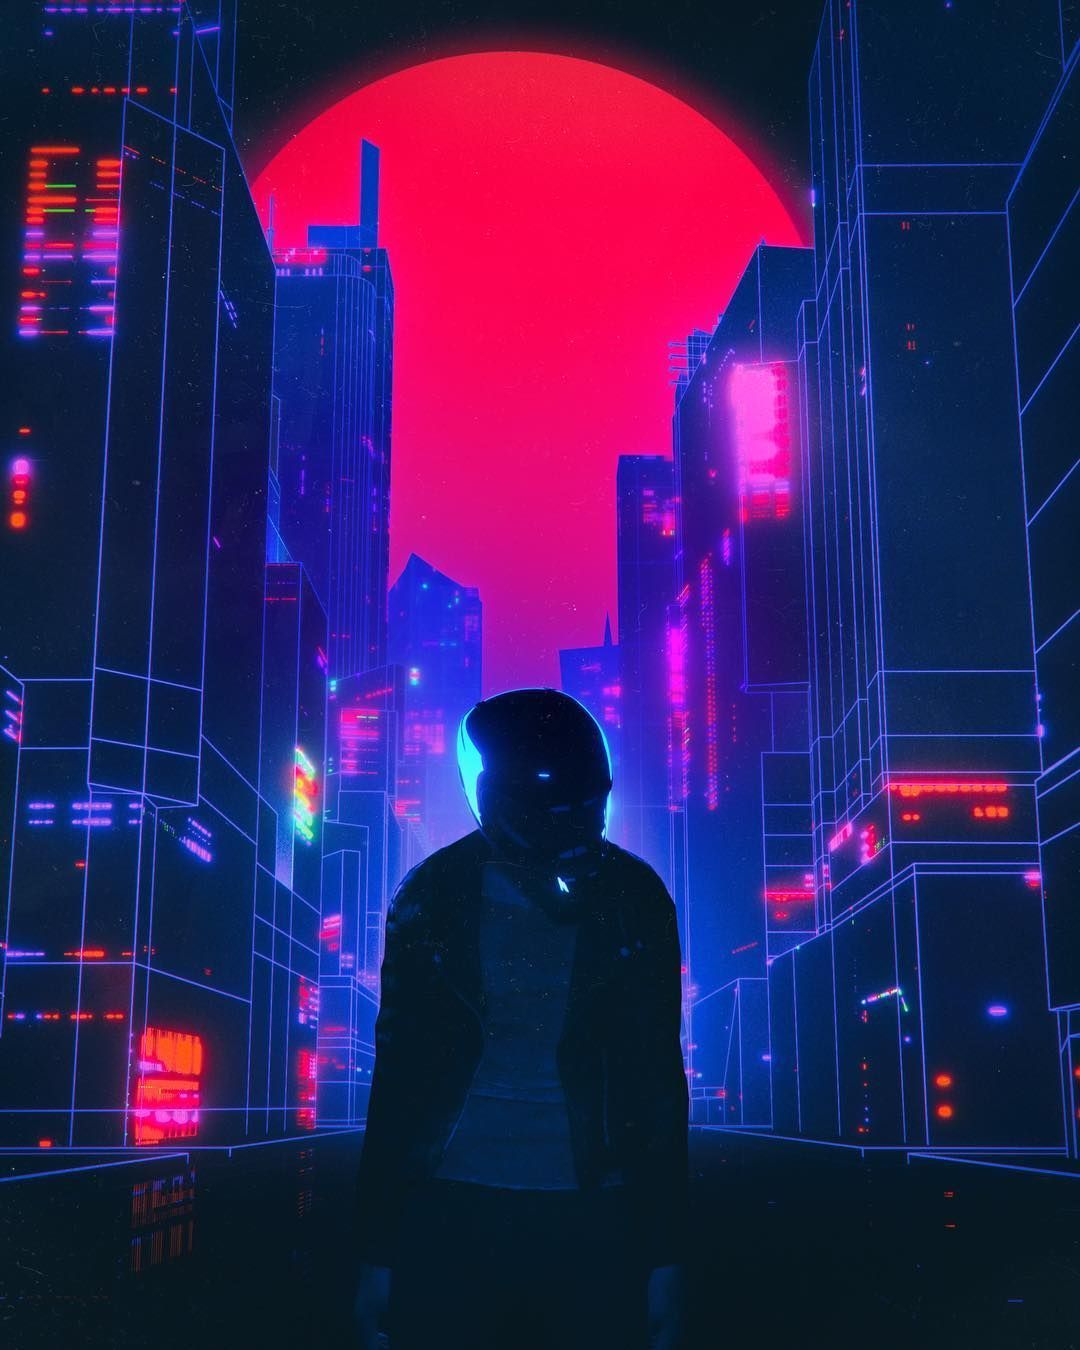 Do Androids Dream Of Electric Sheep?: A CGI Master Made A New Artwork Every Day For 10 Years. Cyberpunk city, Cyberpunk aesthetic, Synthwave art